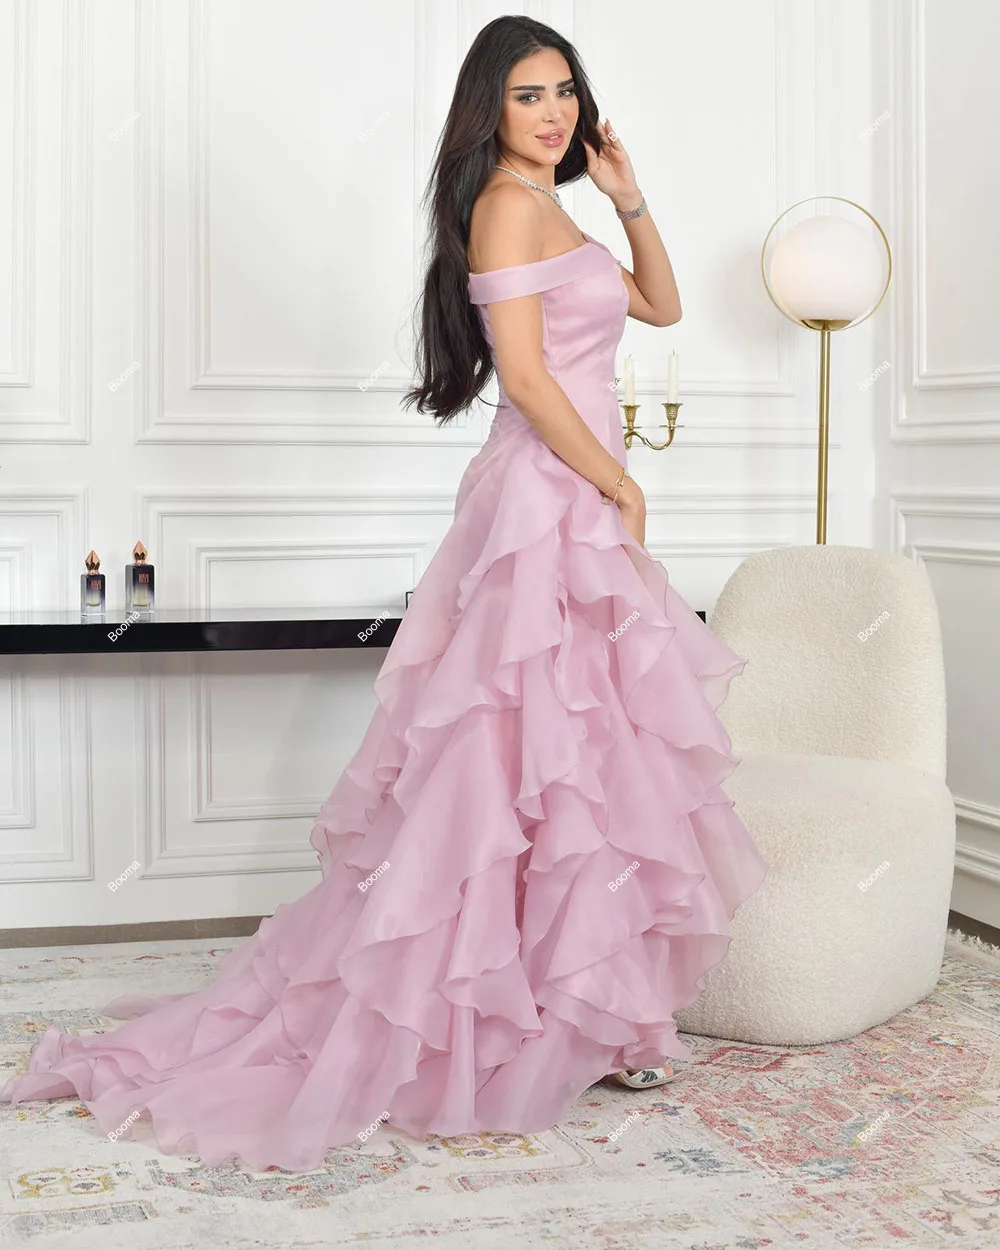 Custom Made Hot Pink Mini Skirt Short Puffy Prom Dresses For Women Tired,  Puffy, Strapless, Short Evening Gown For Cocktail Parties And Soirées From  Veralovebridal, $93.47 | DHgate.Com